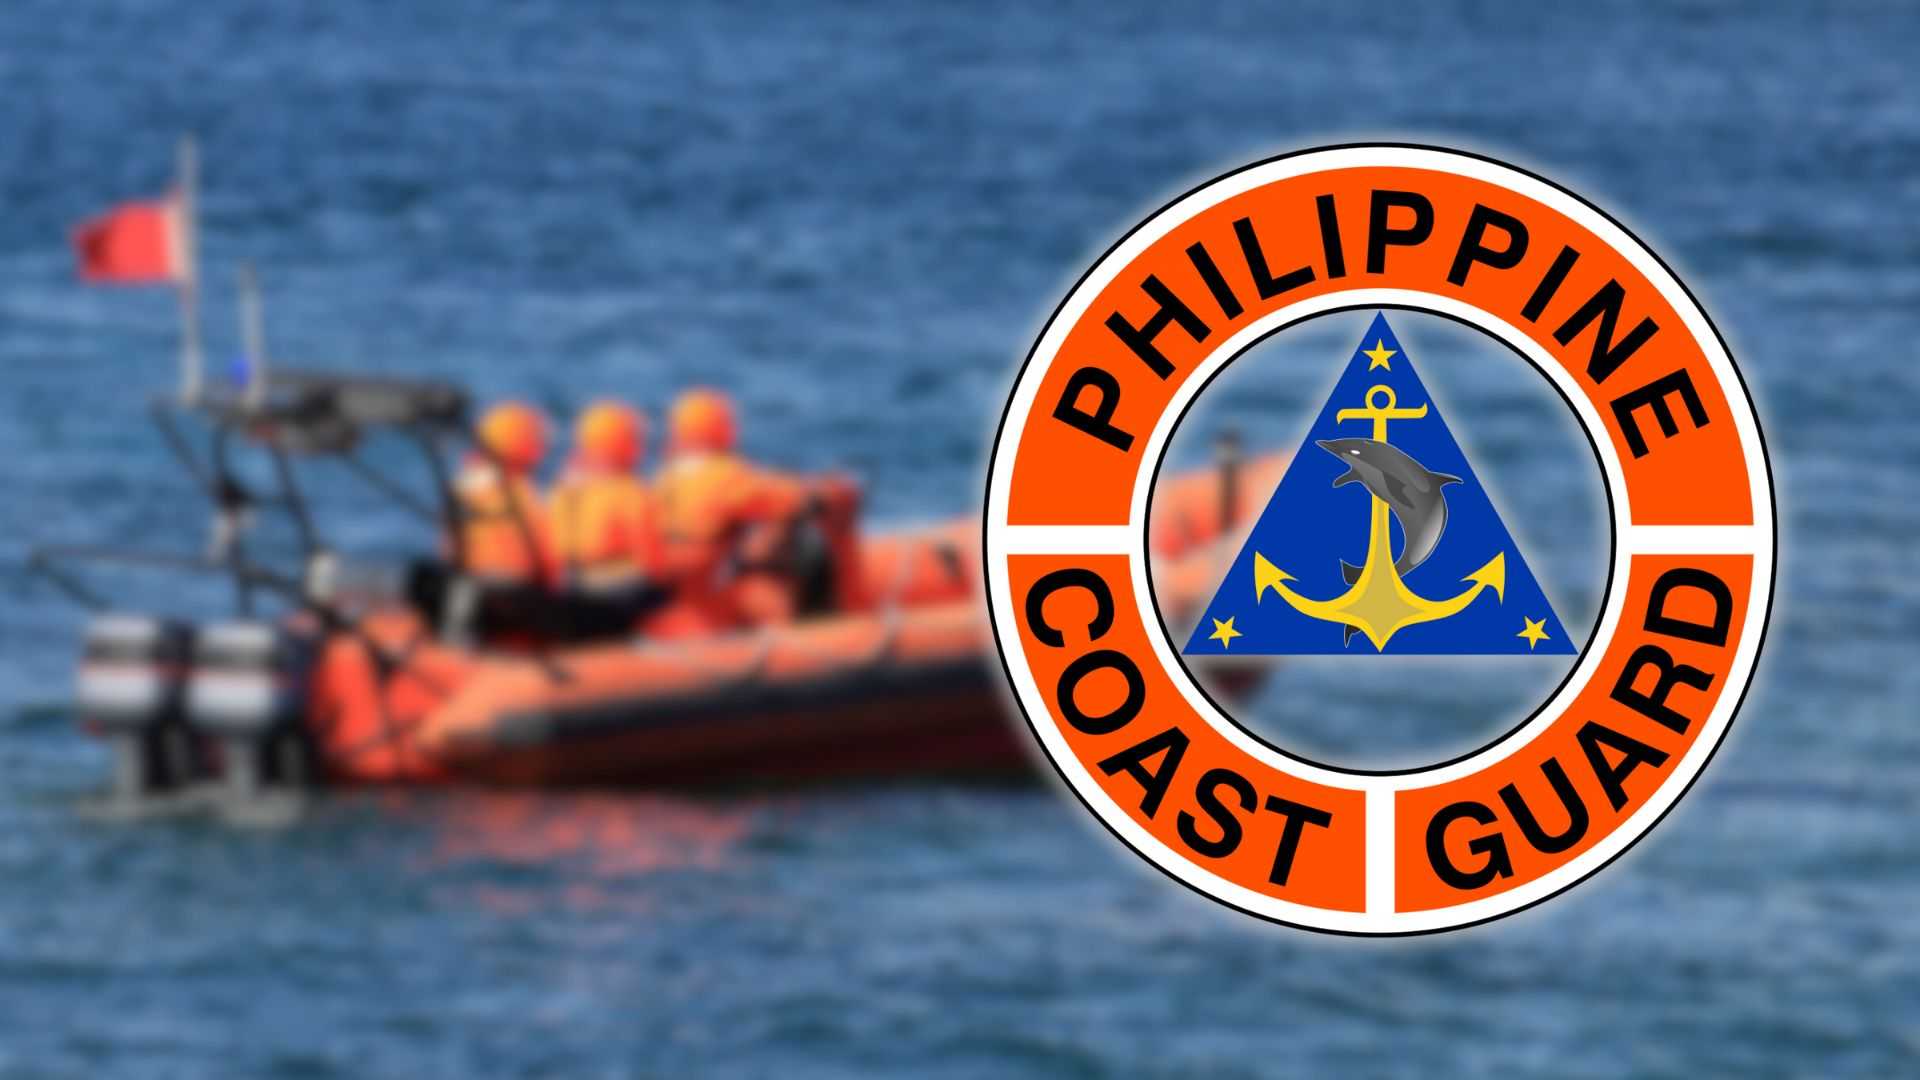 PCG on heightened alert for passenger safety during holiday season